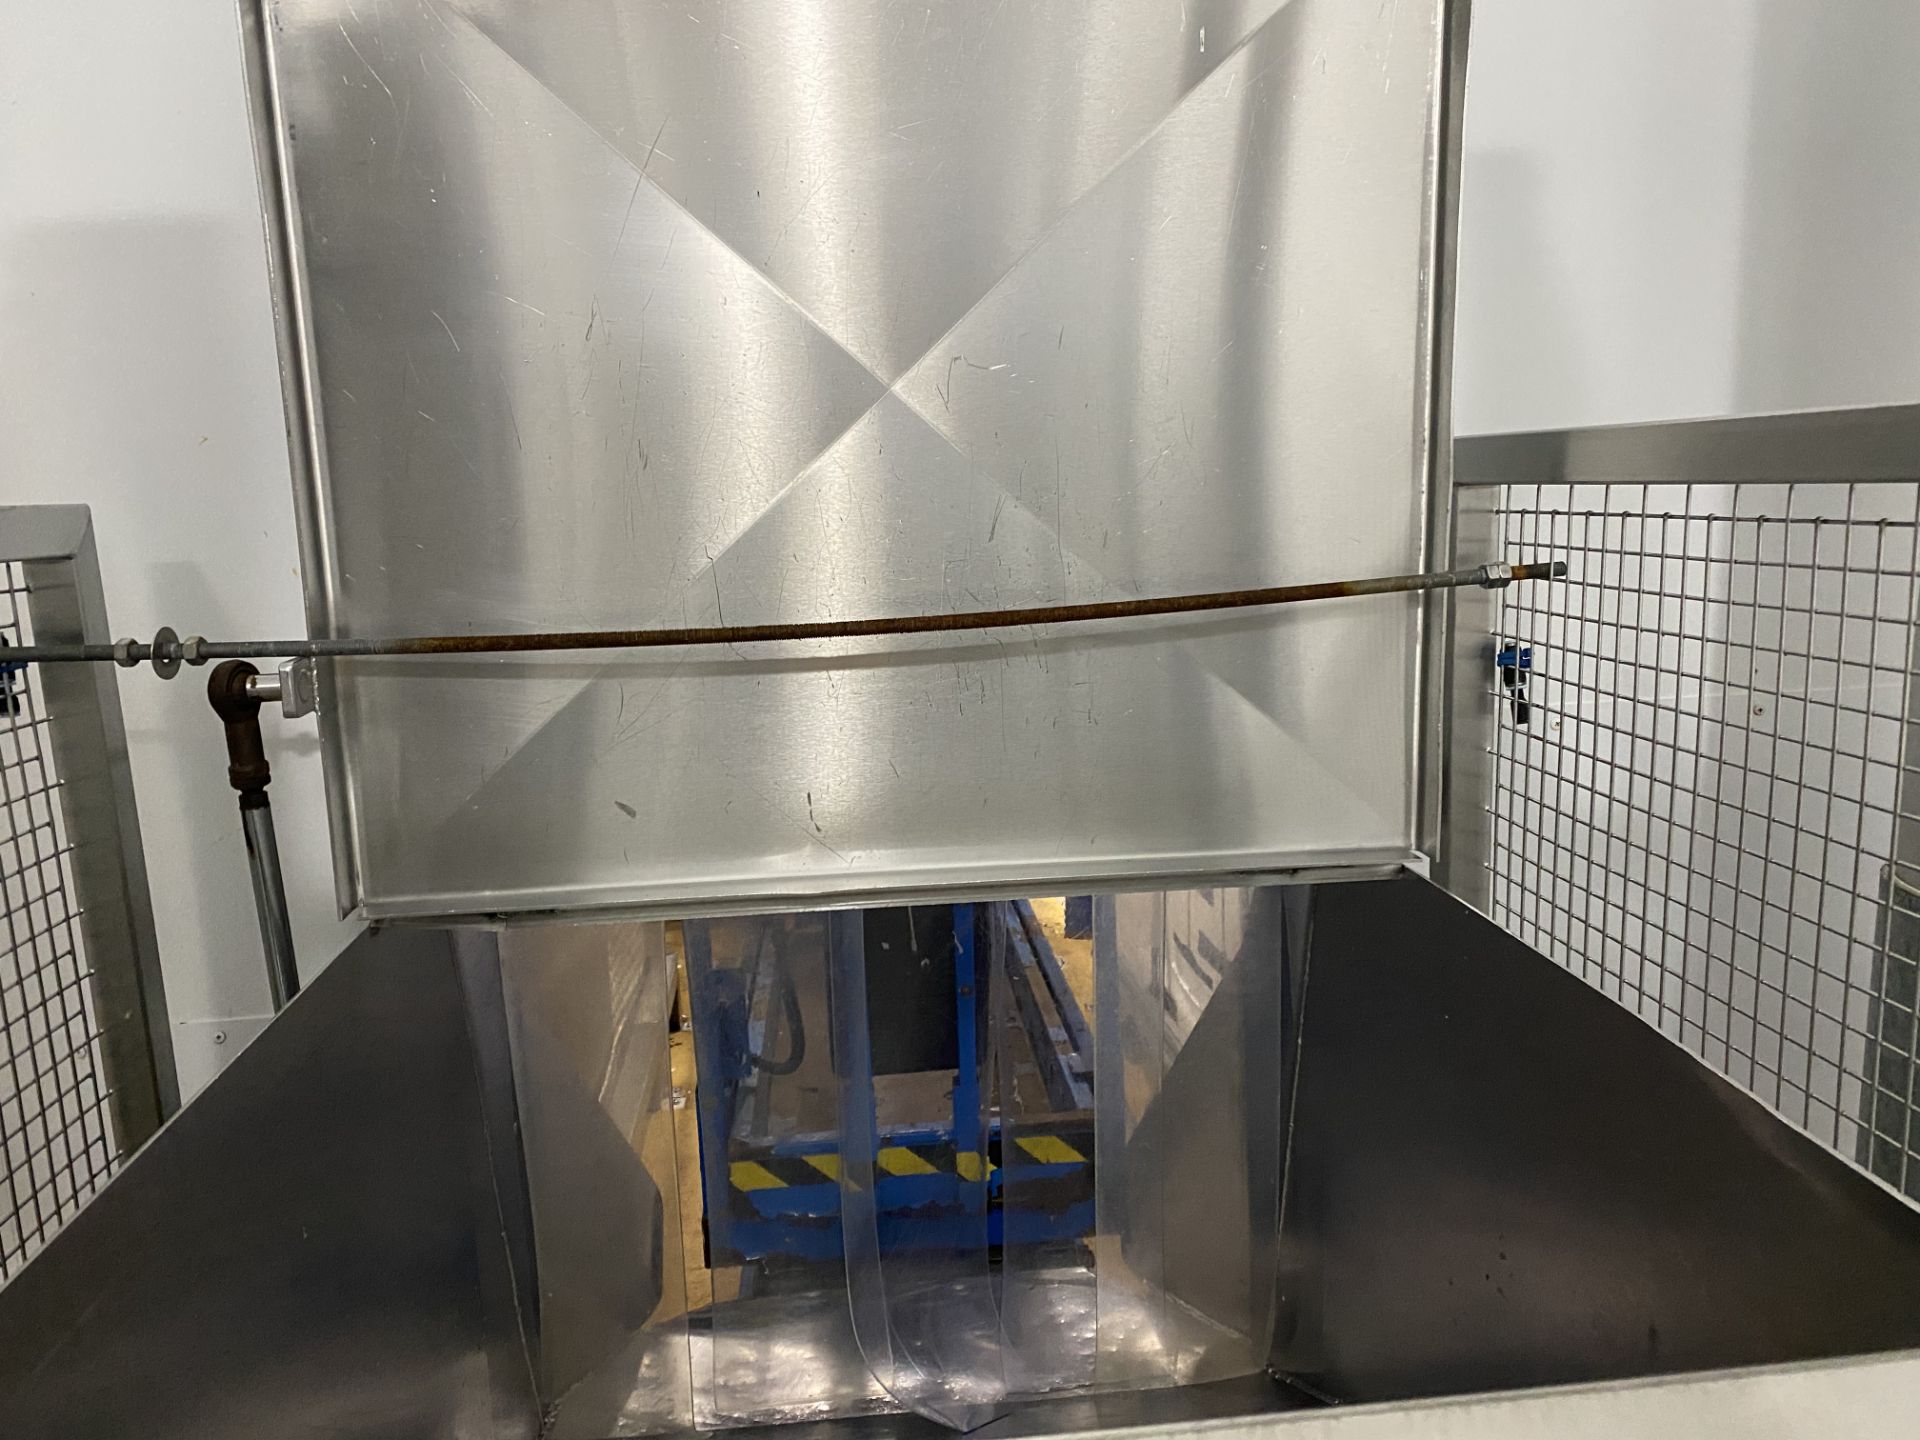 Syspal Tray waste hoist, DOM 2018 - Image 5 of 5